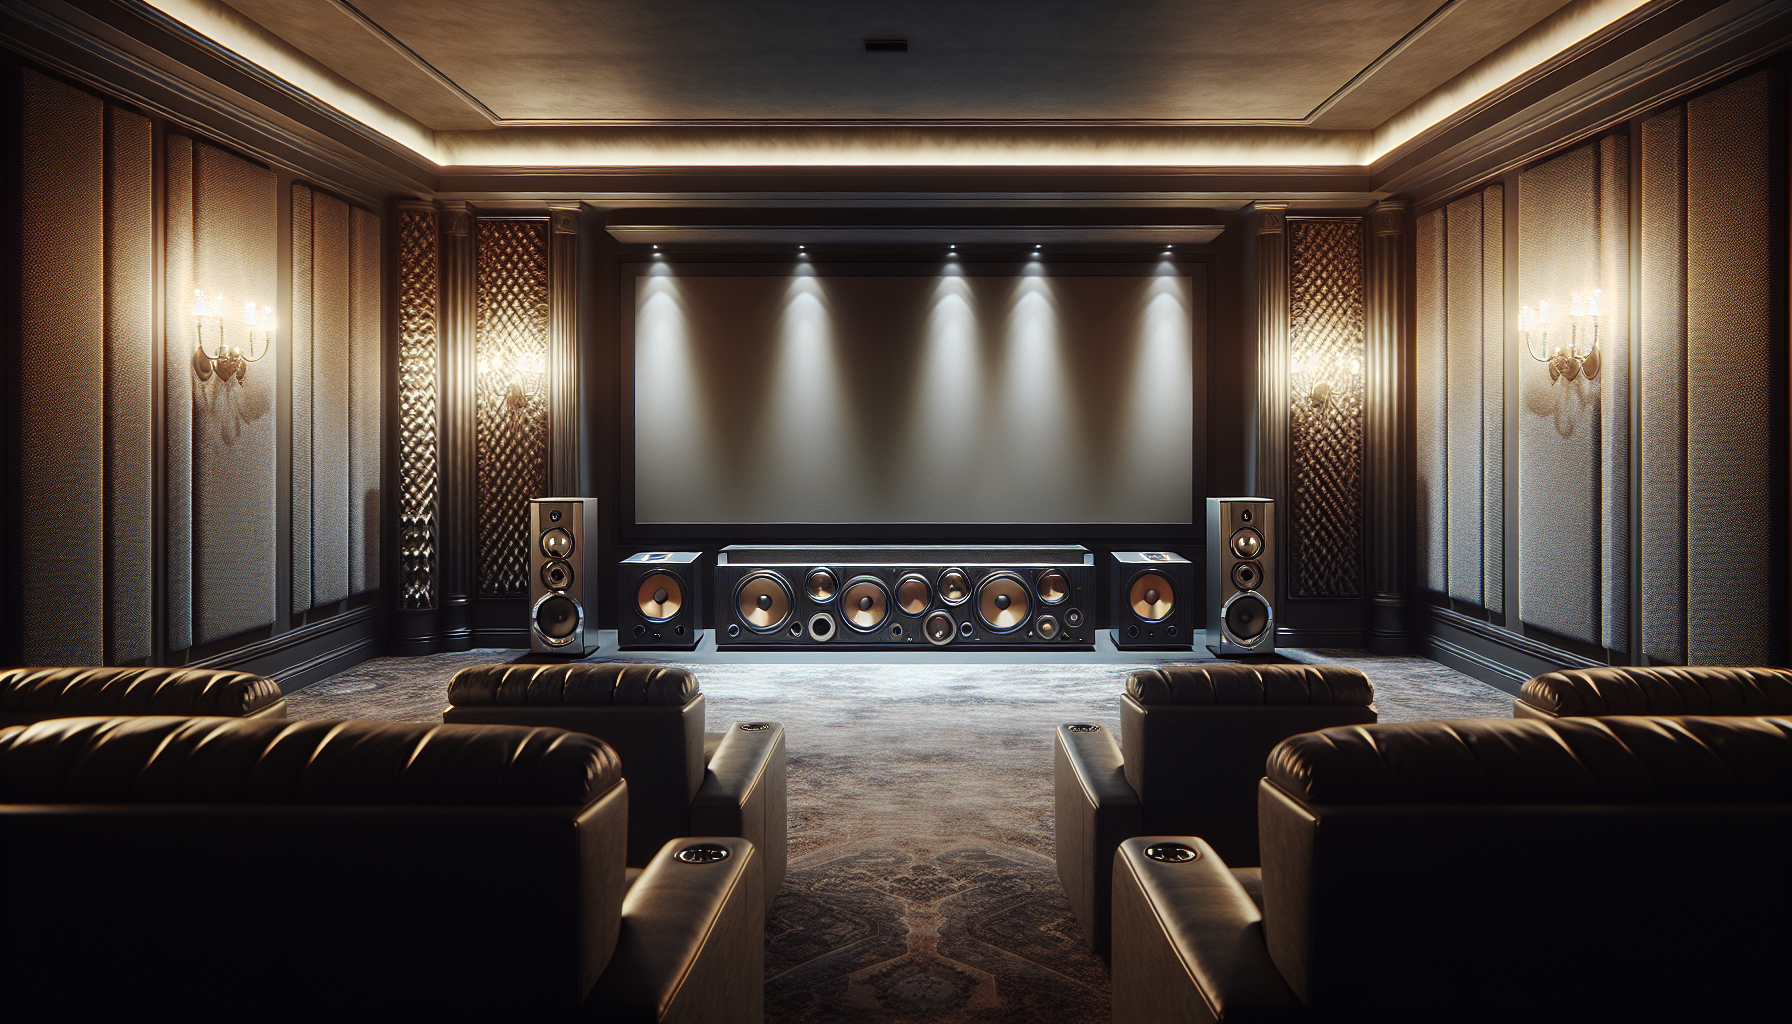 Home theater room with a carefully selected center channel speaker